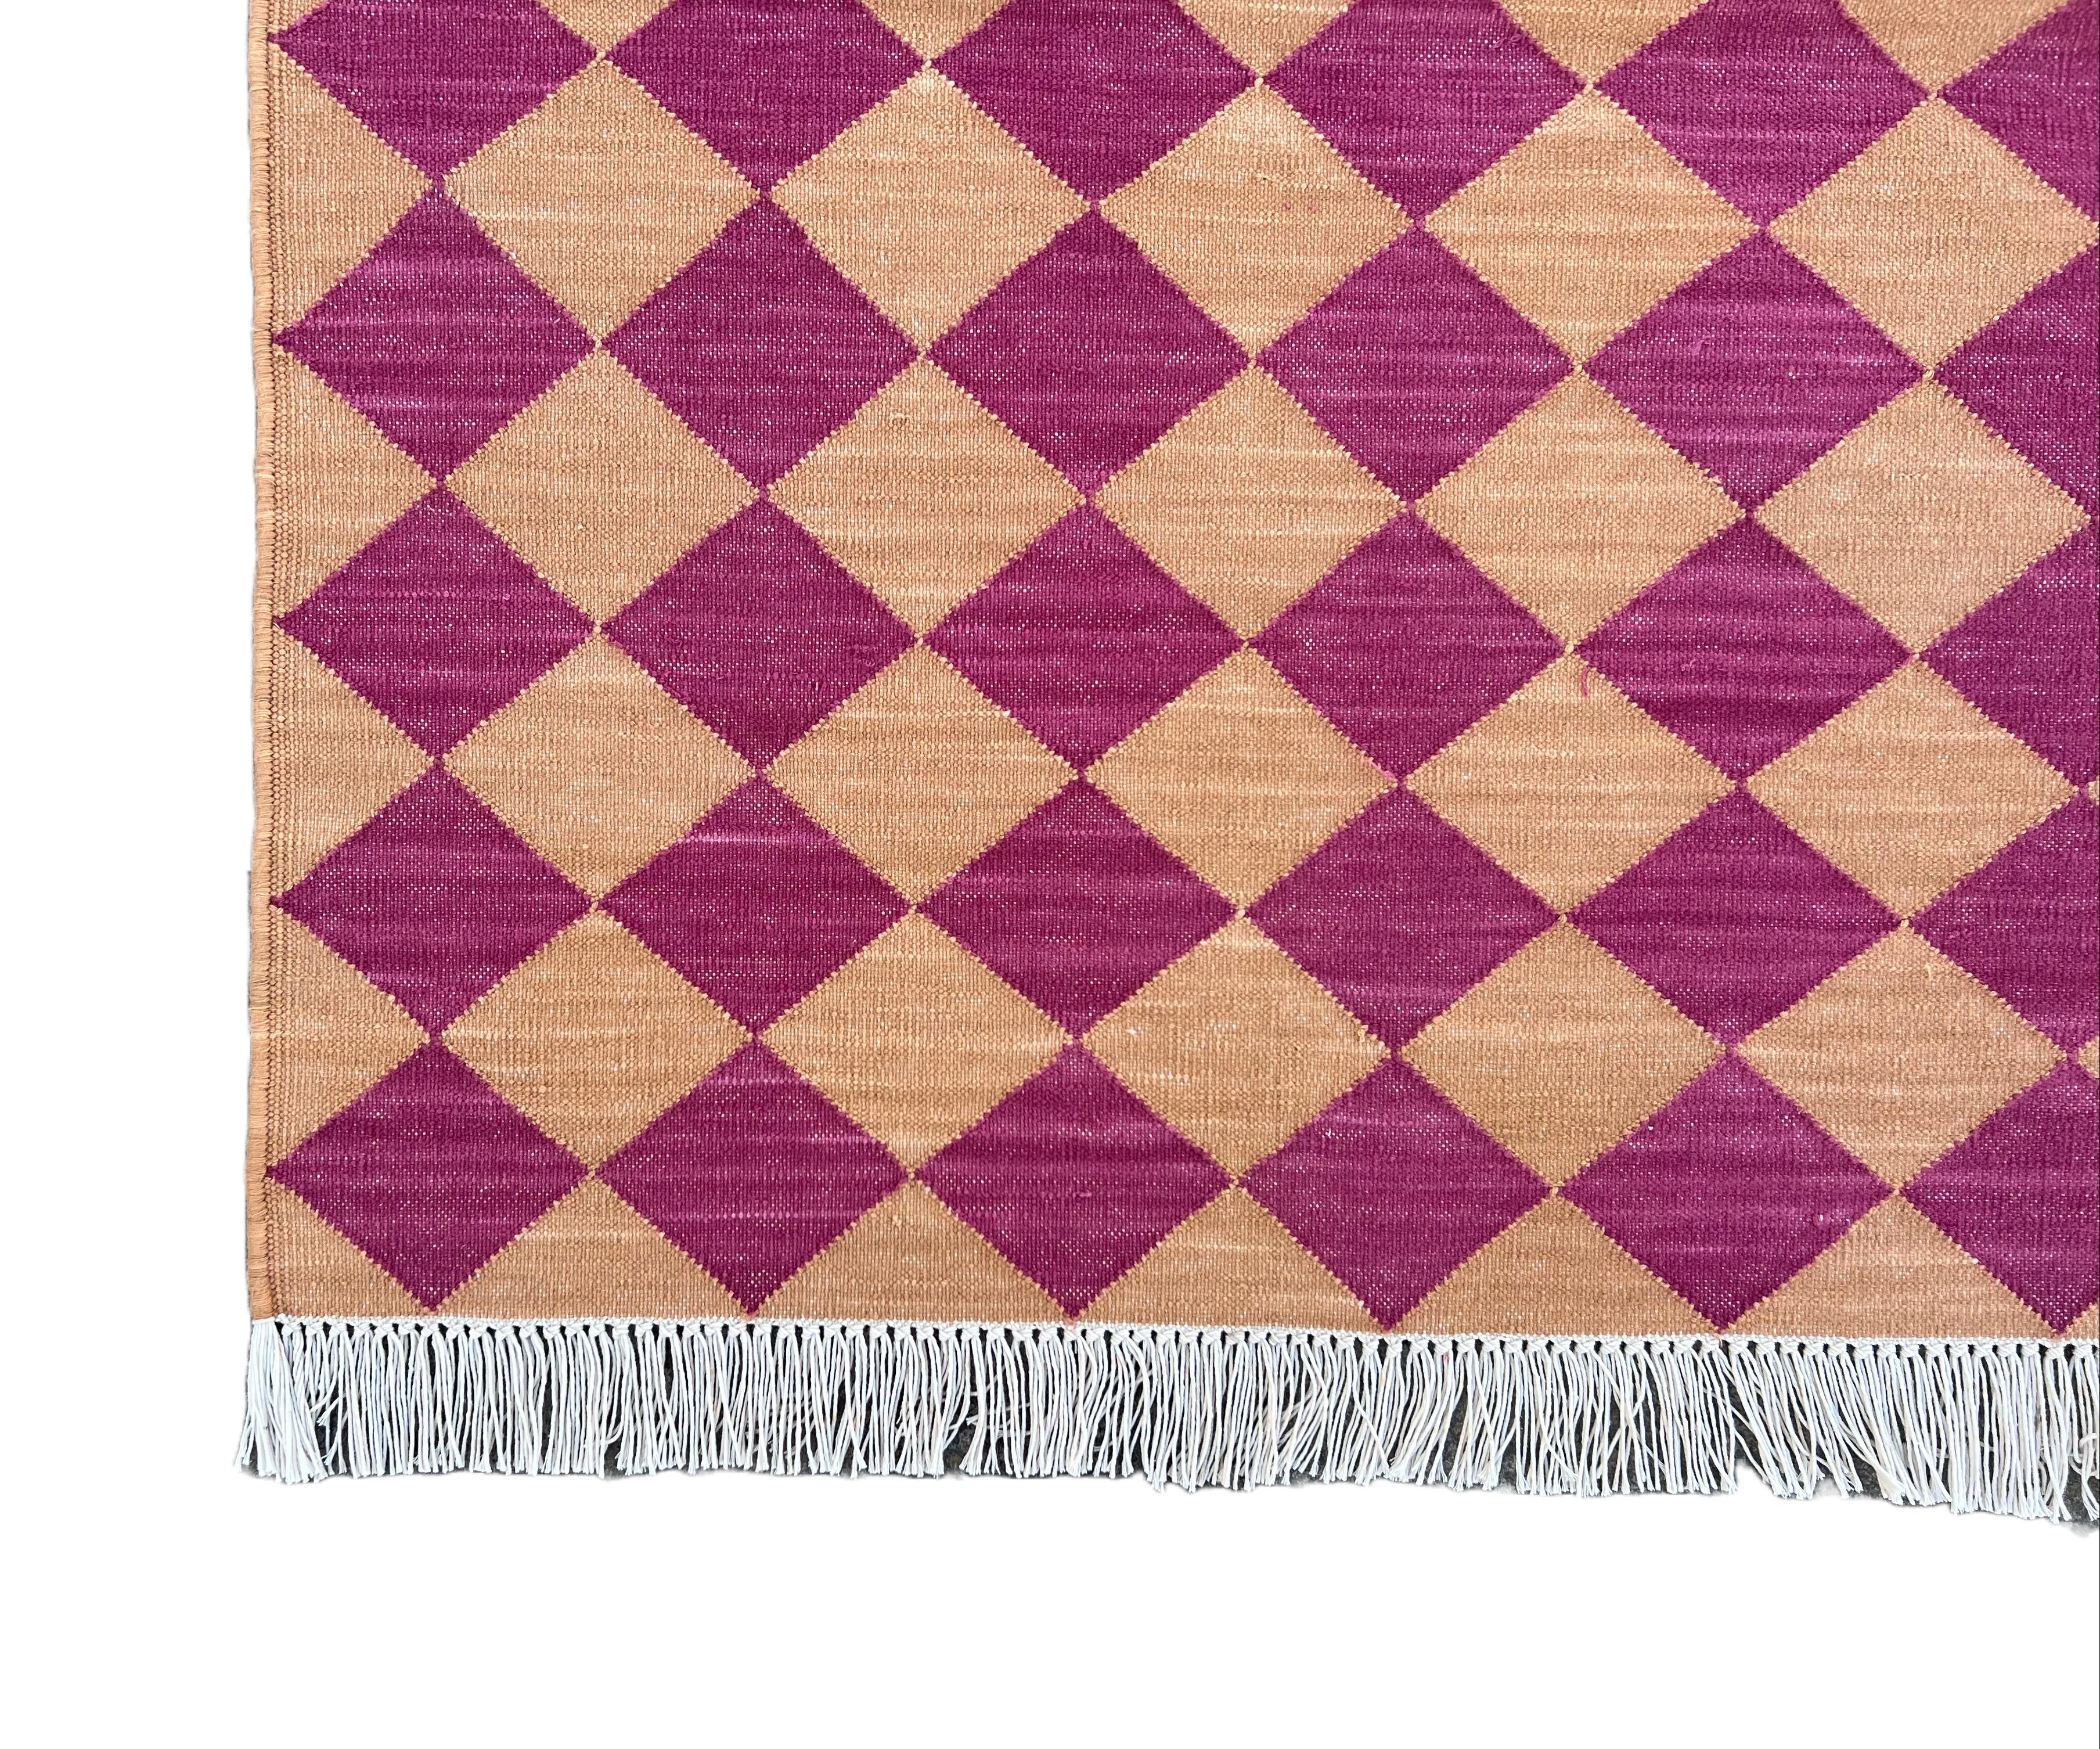 Handmade Cotton Area Flat Weave Rug, 4x6 Pink And Tan Checked Indian Dhurrie Rug For Sale 2